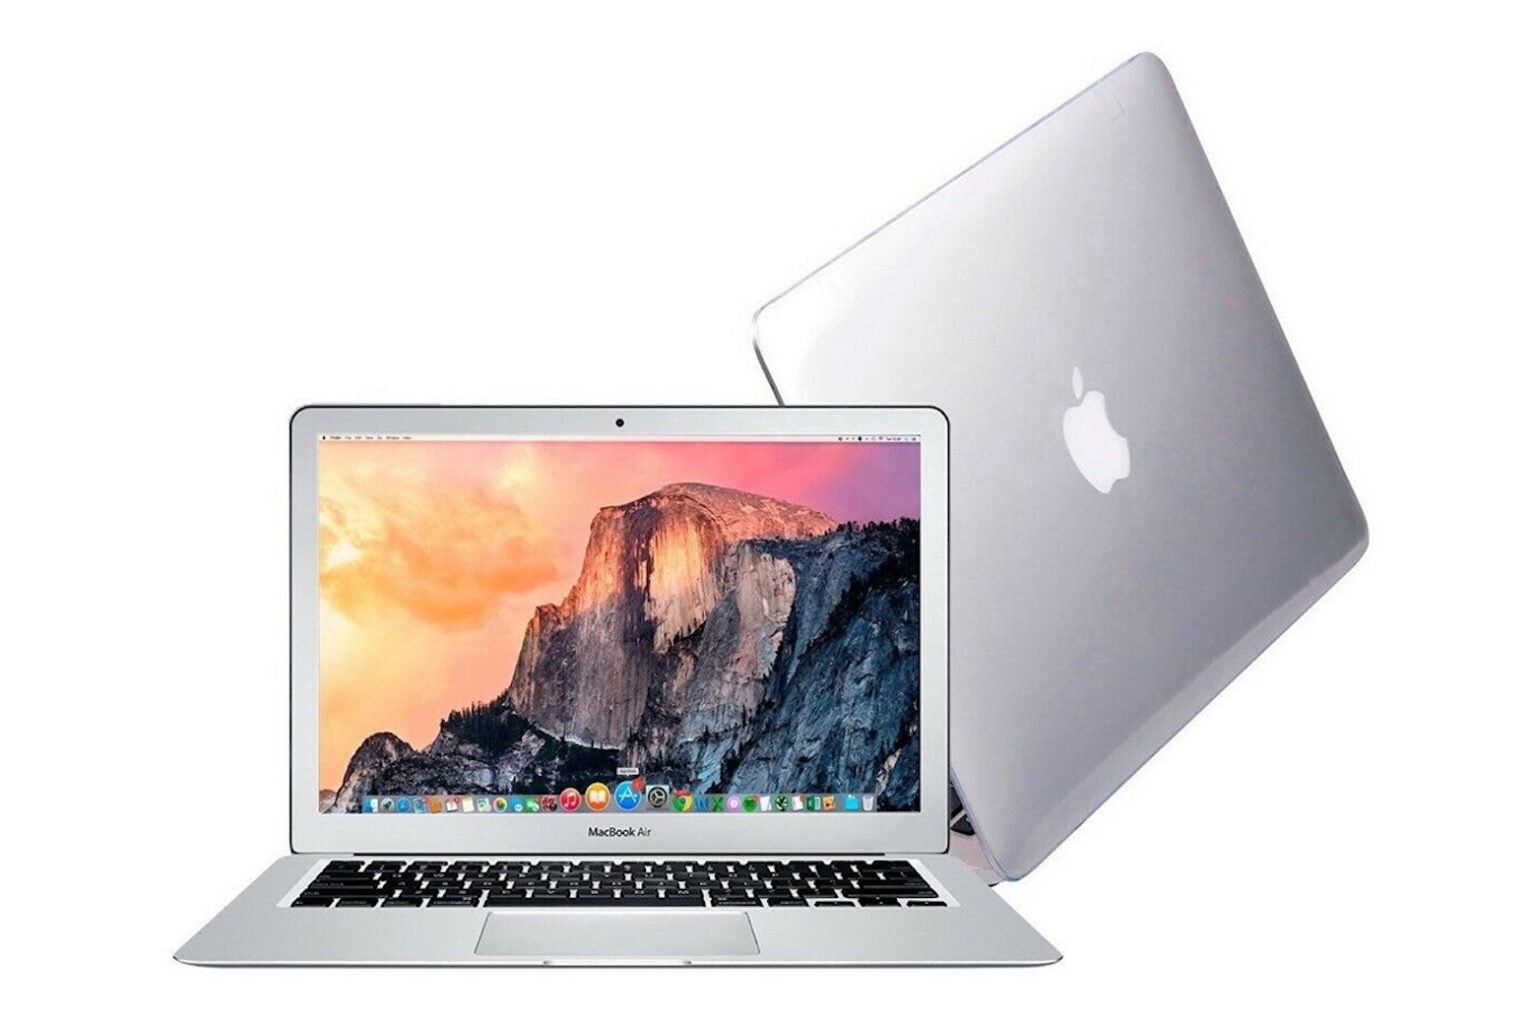 Looking for a new laptop? Score this refurbished MacBook Air for $355.